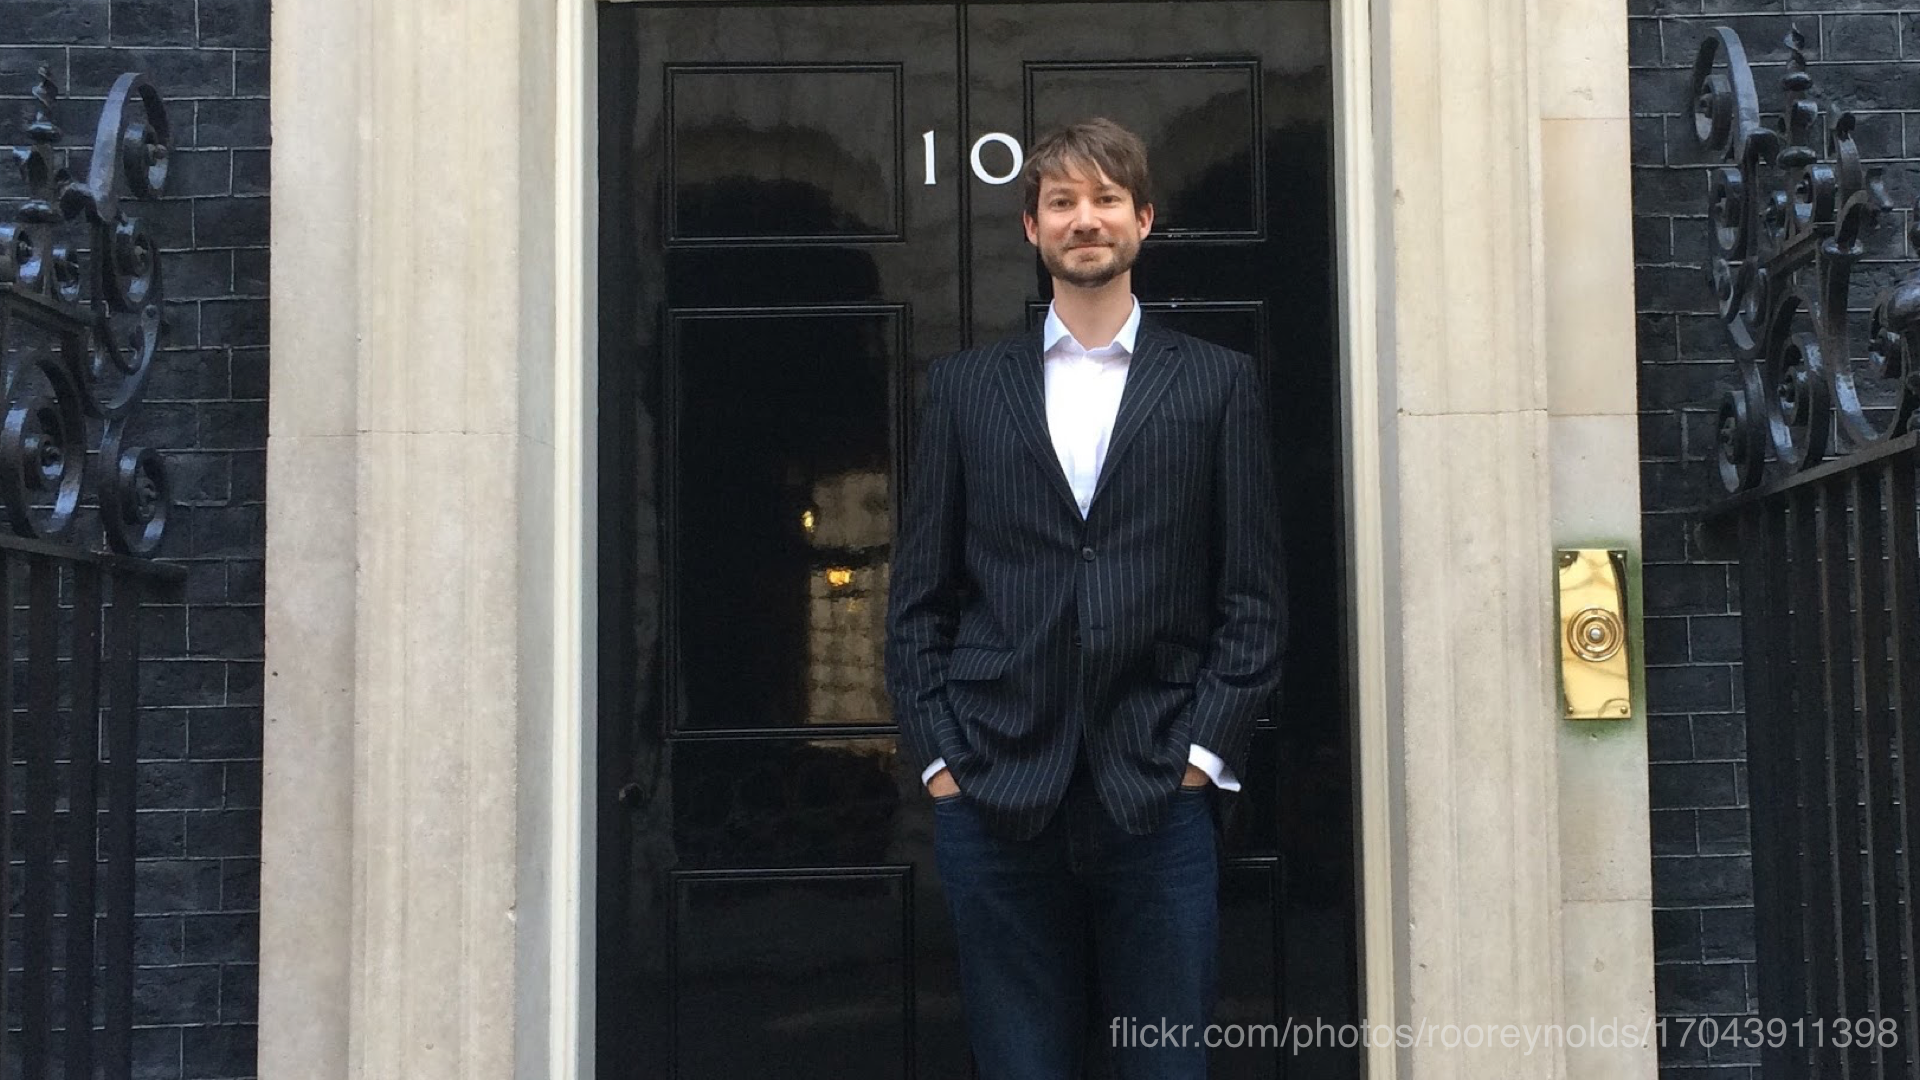 A photo of Roo standing outside Number 10 Downing Street